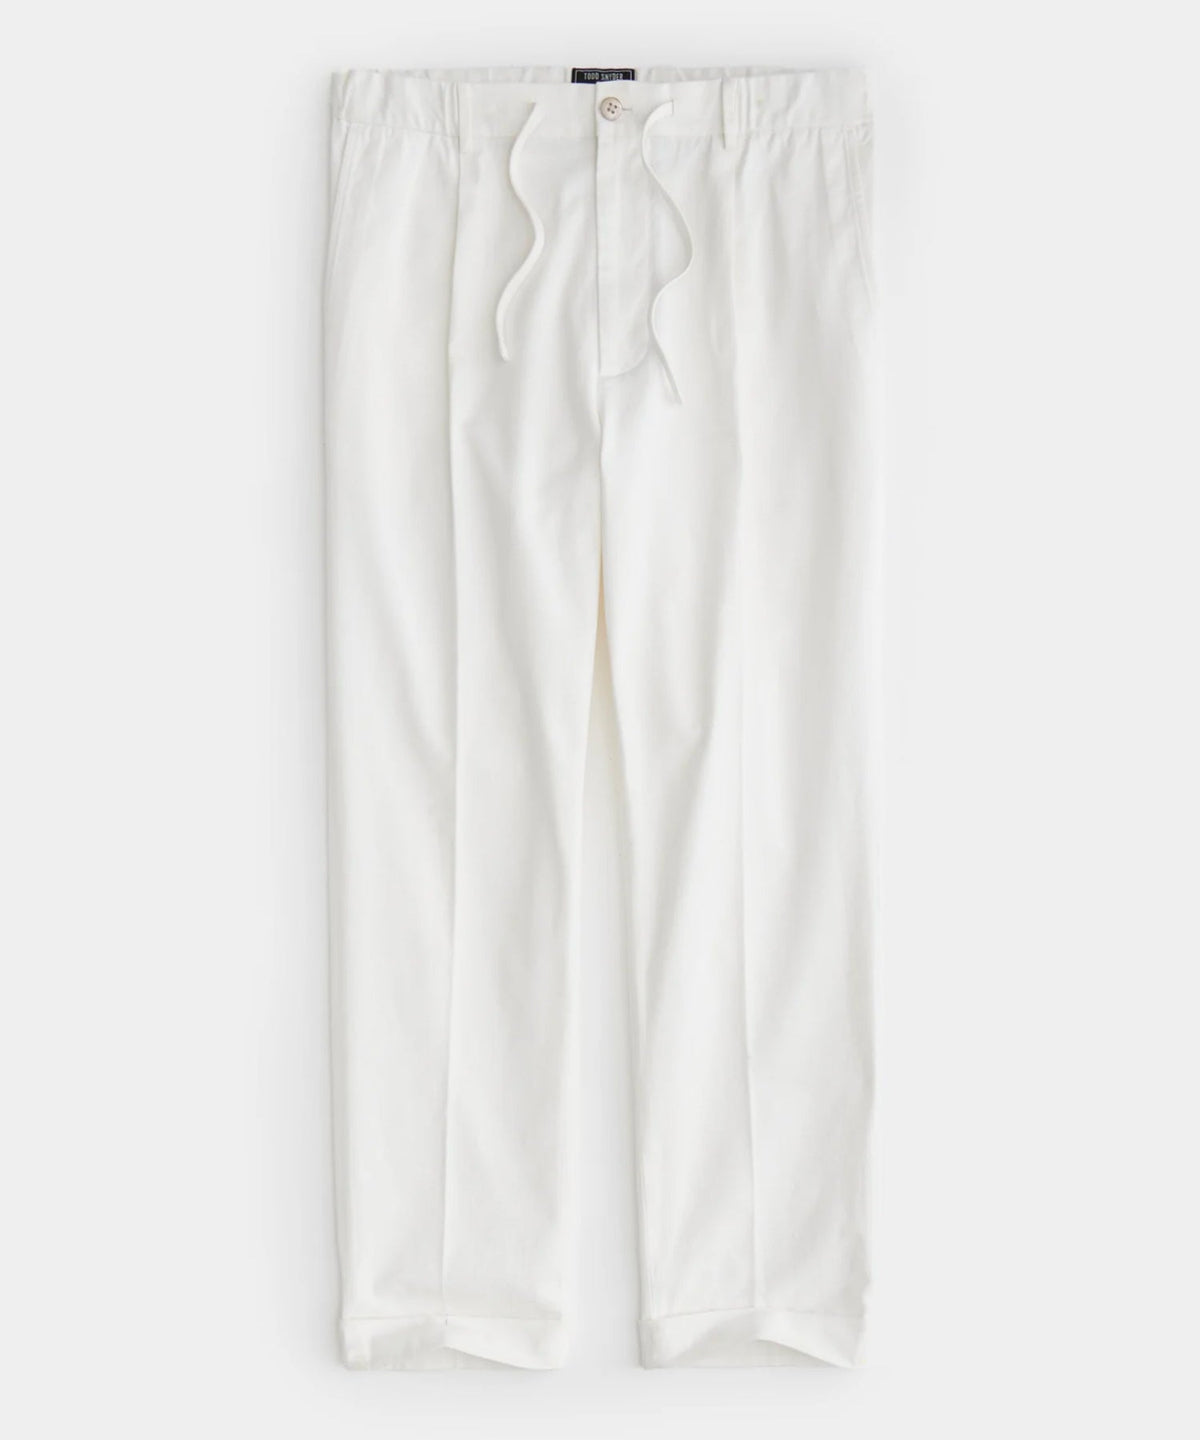 Modern Chino Trouser in Bisque